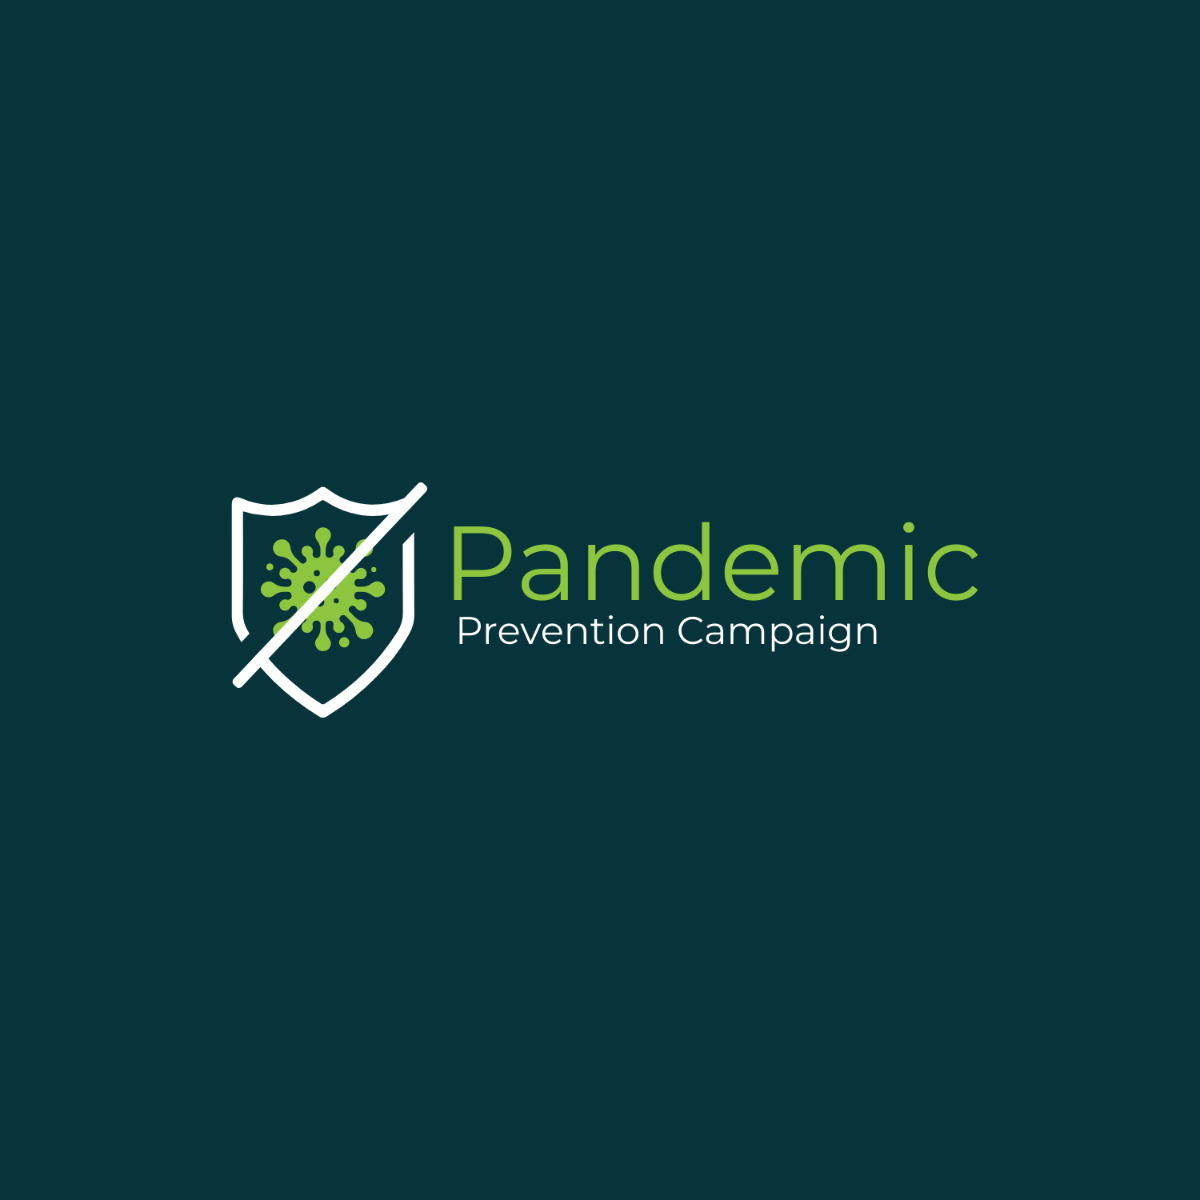 Pandemic Prevention Campaign Logo Template